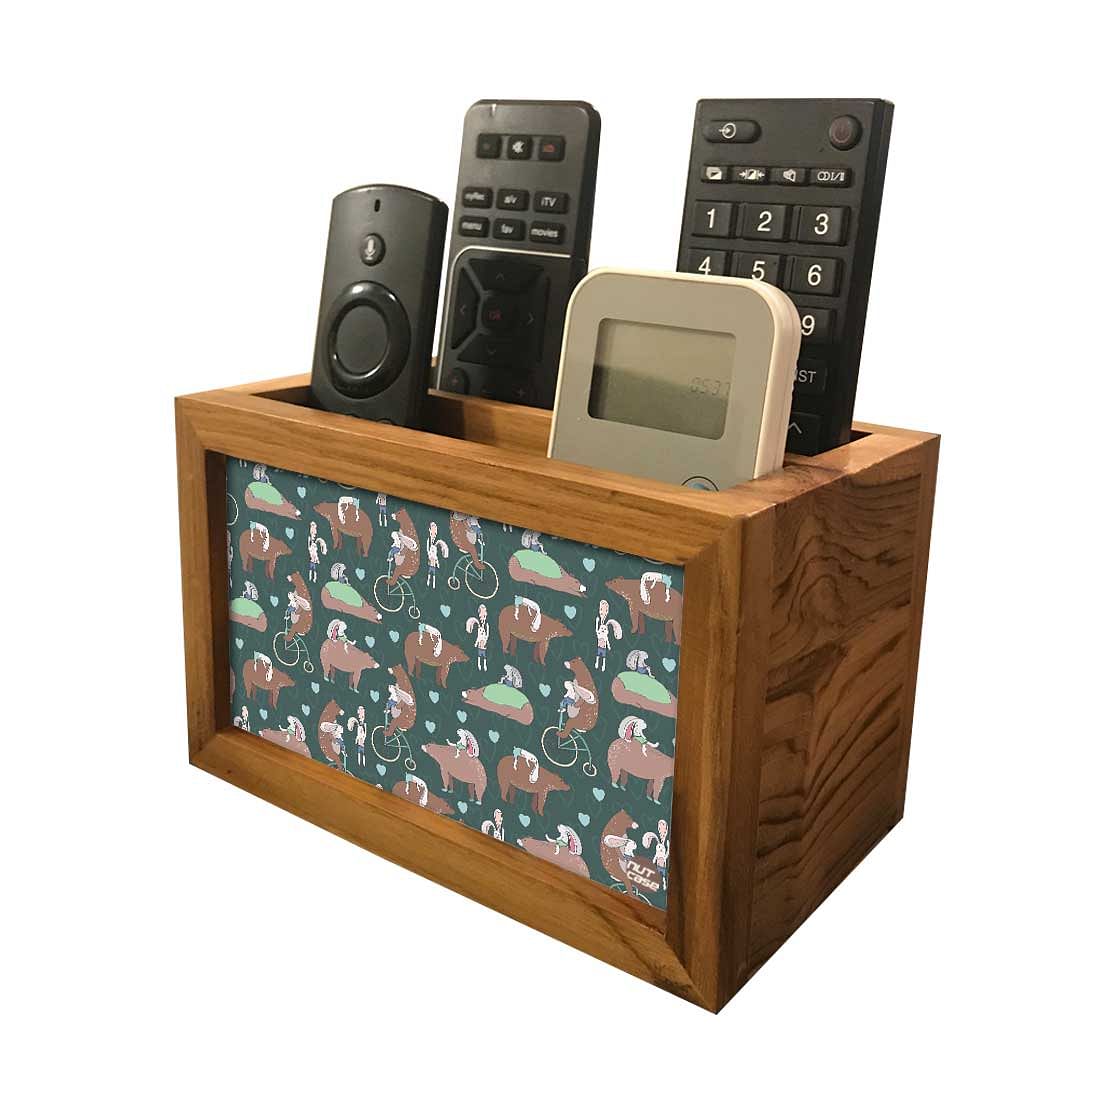 Cute Small Remote Control Holder - BEARS AND WOODS Nutcase